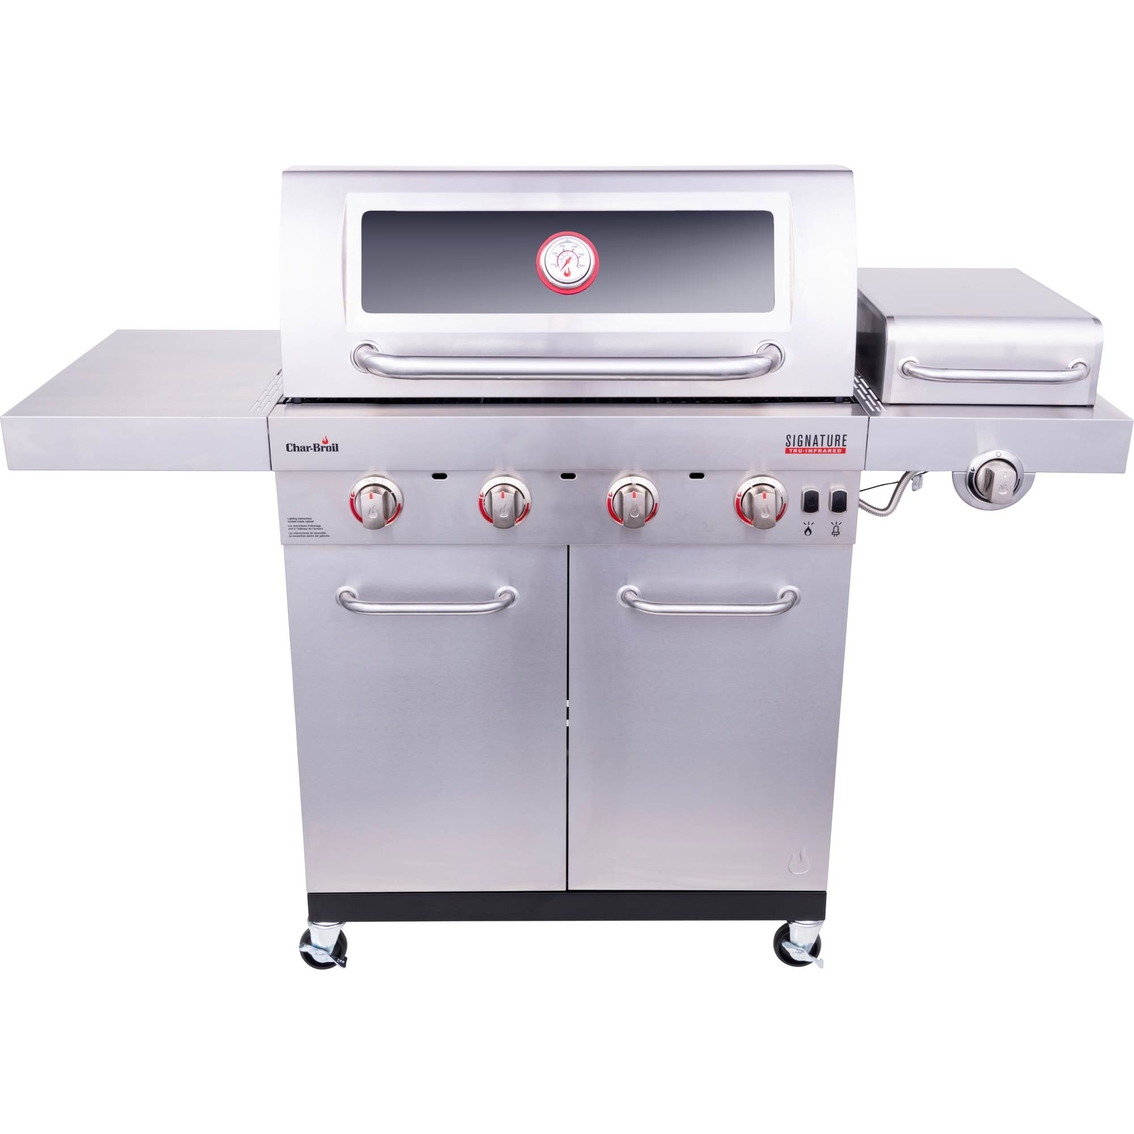 Char-broil Signature 4-burner Gas Grill | Grills & Smokers | Patio, Garden & Garage | Shop The Exchange